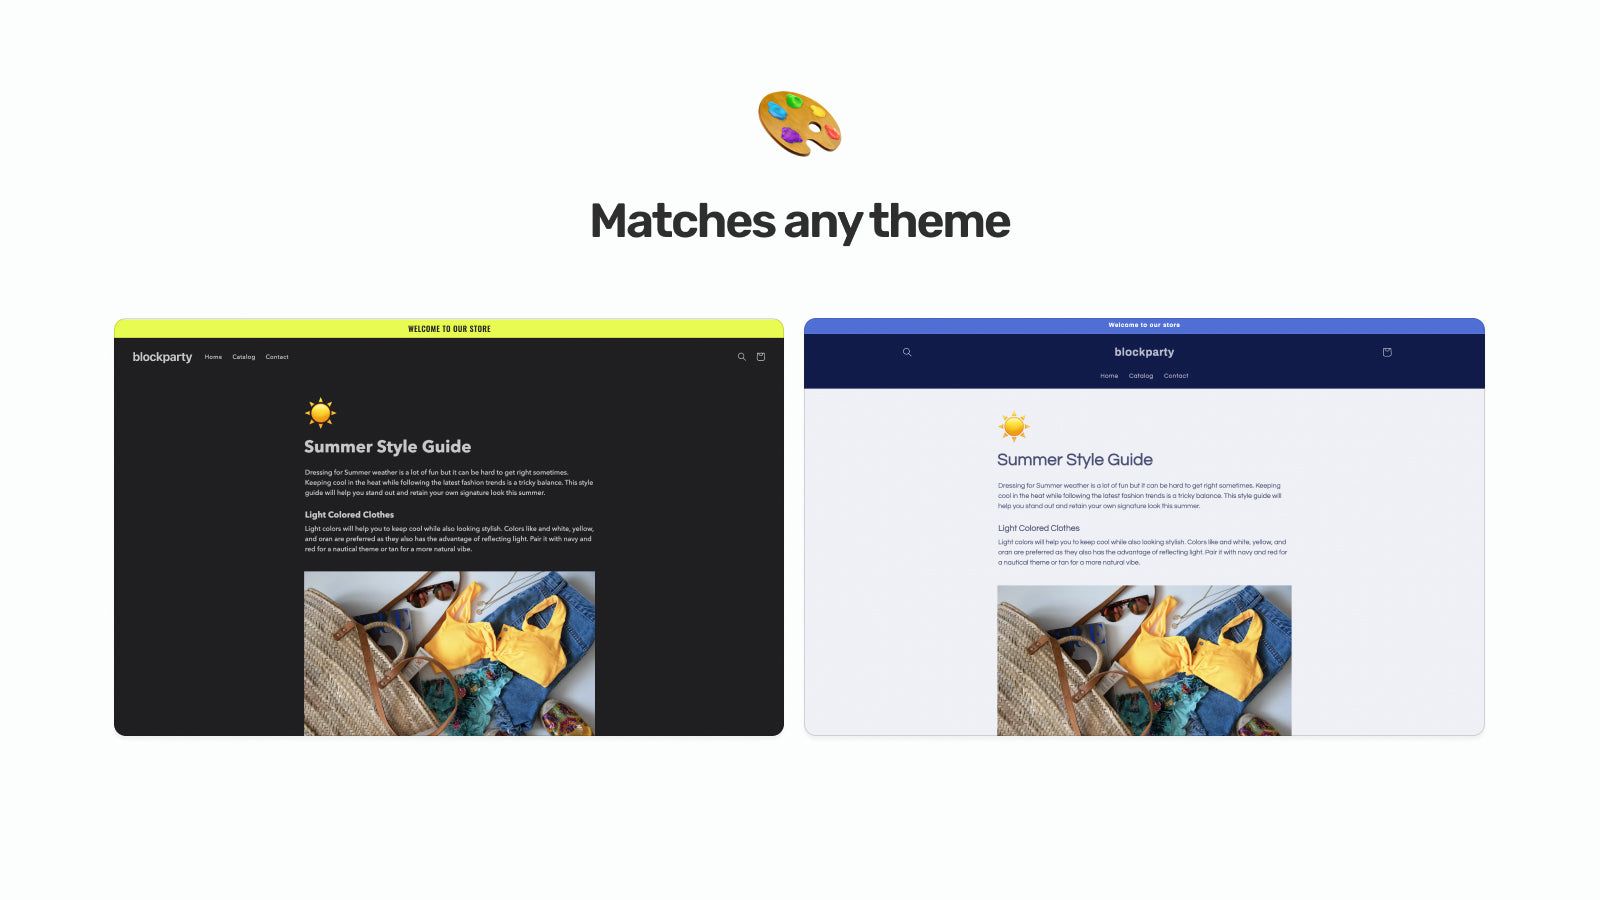 Matches any theme